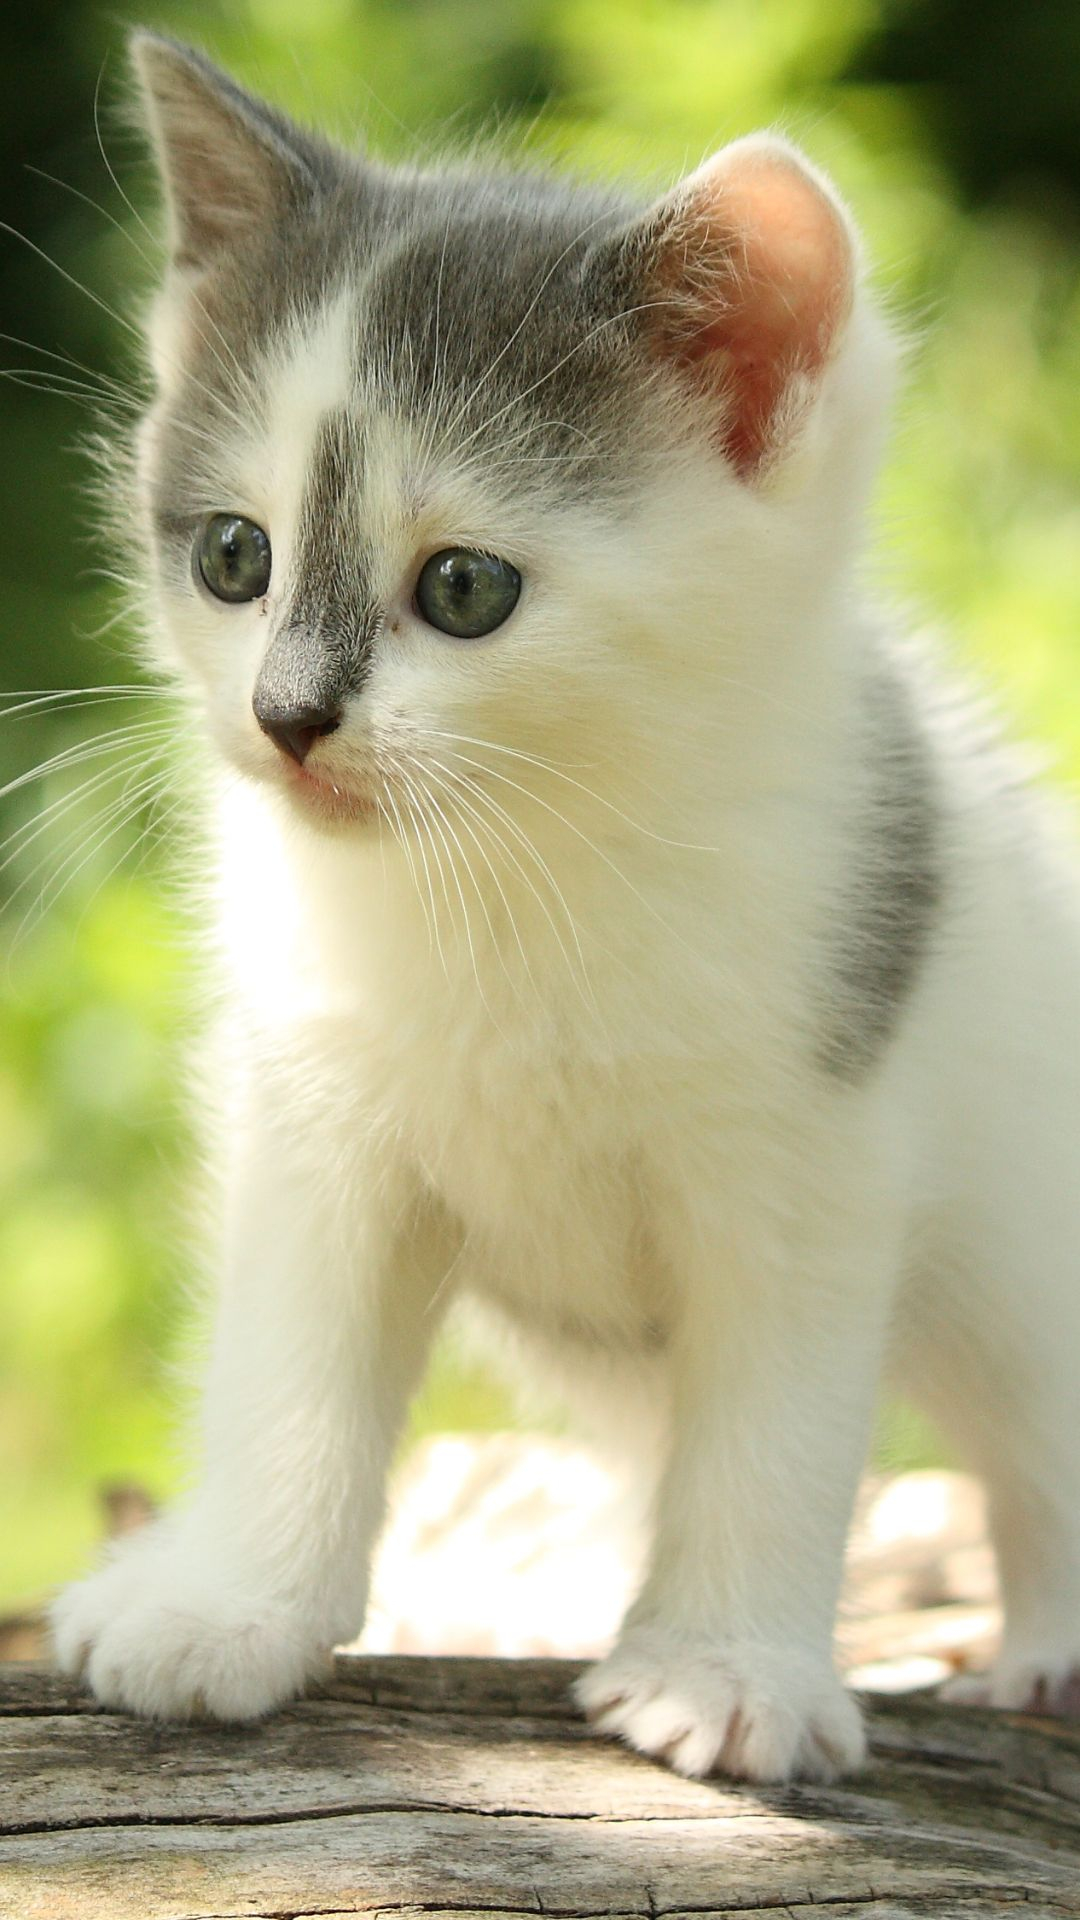 1080x1920 Animal / Cat () Mobile Wallpaper | Cute puppies and kittens, Kittens cutest, Cute cats